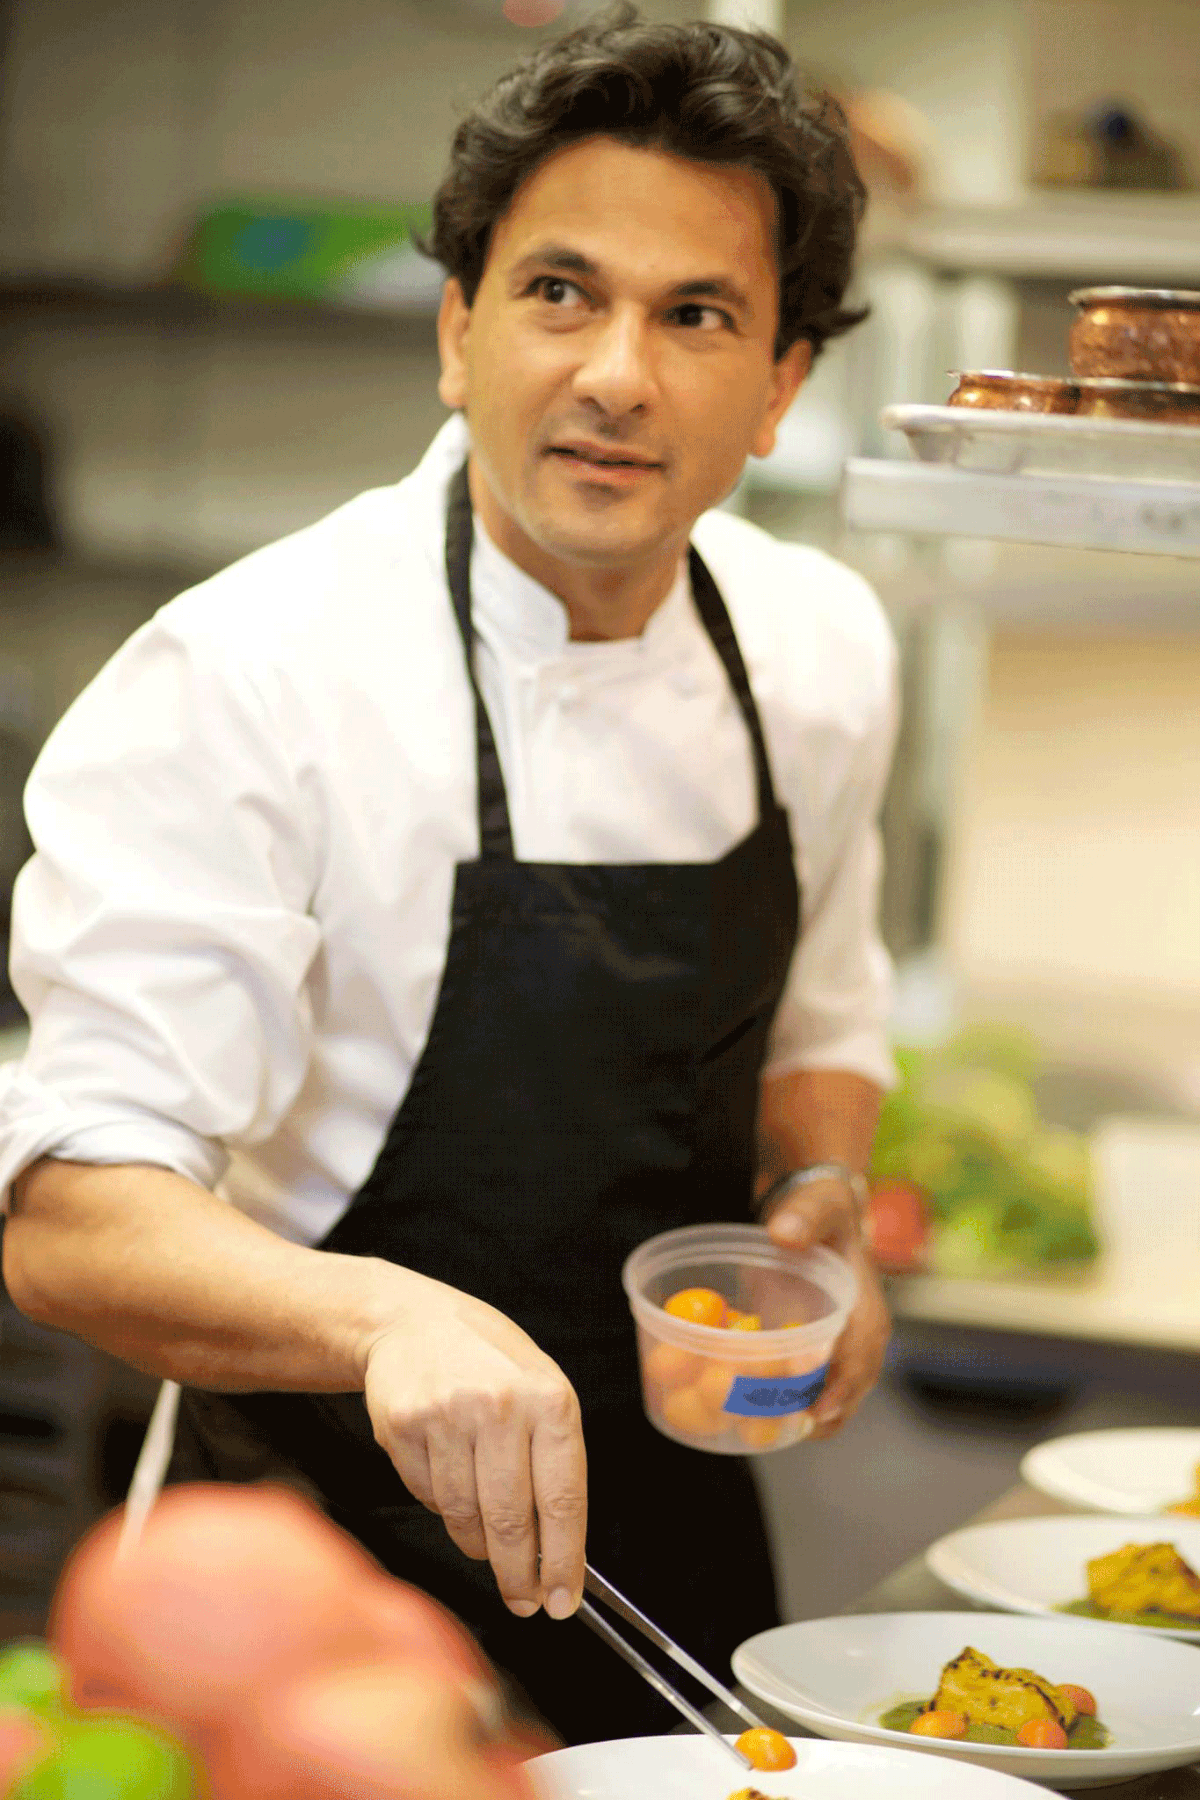 On Vikas Khanna’s birthday, we celebrate by giving you 5 facts about the man.